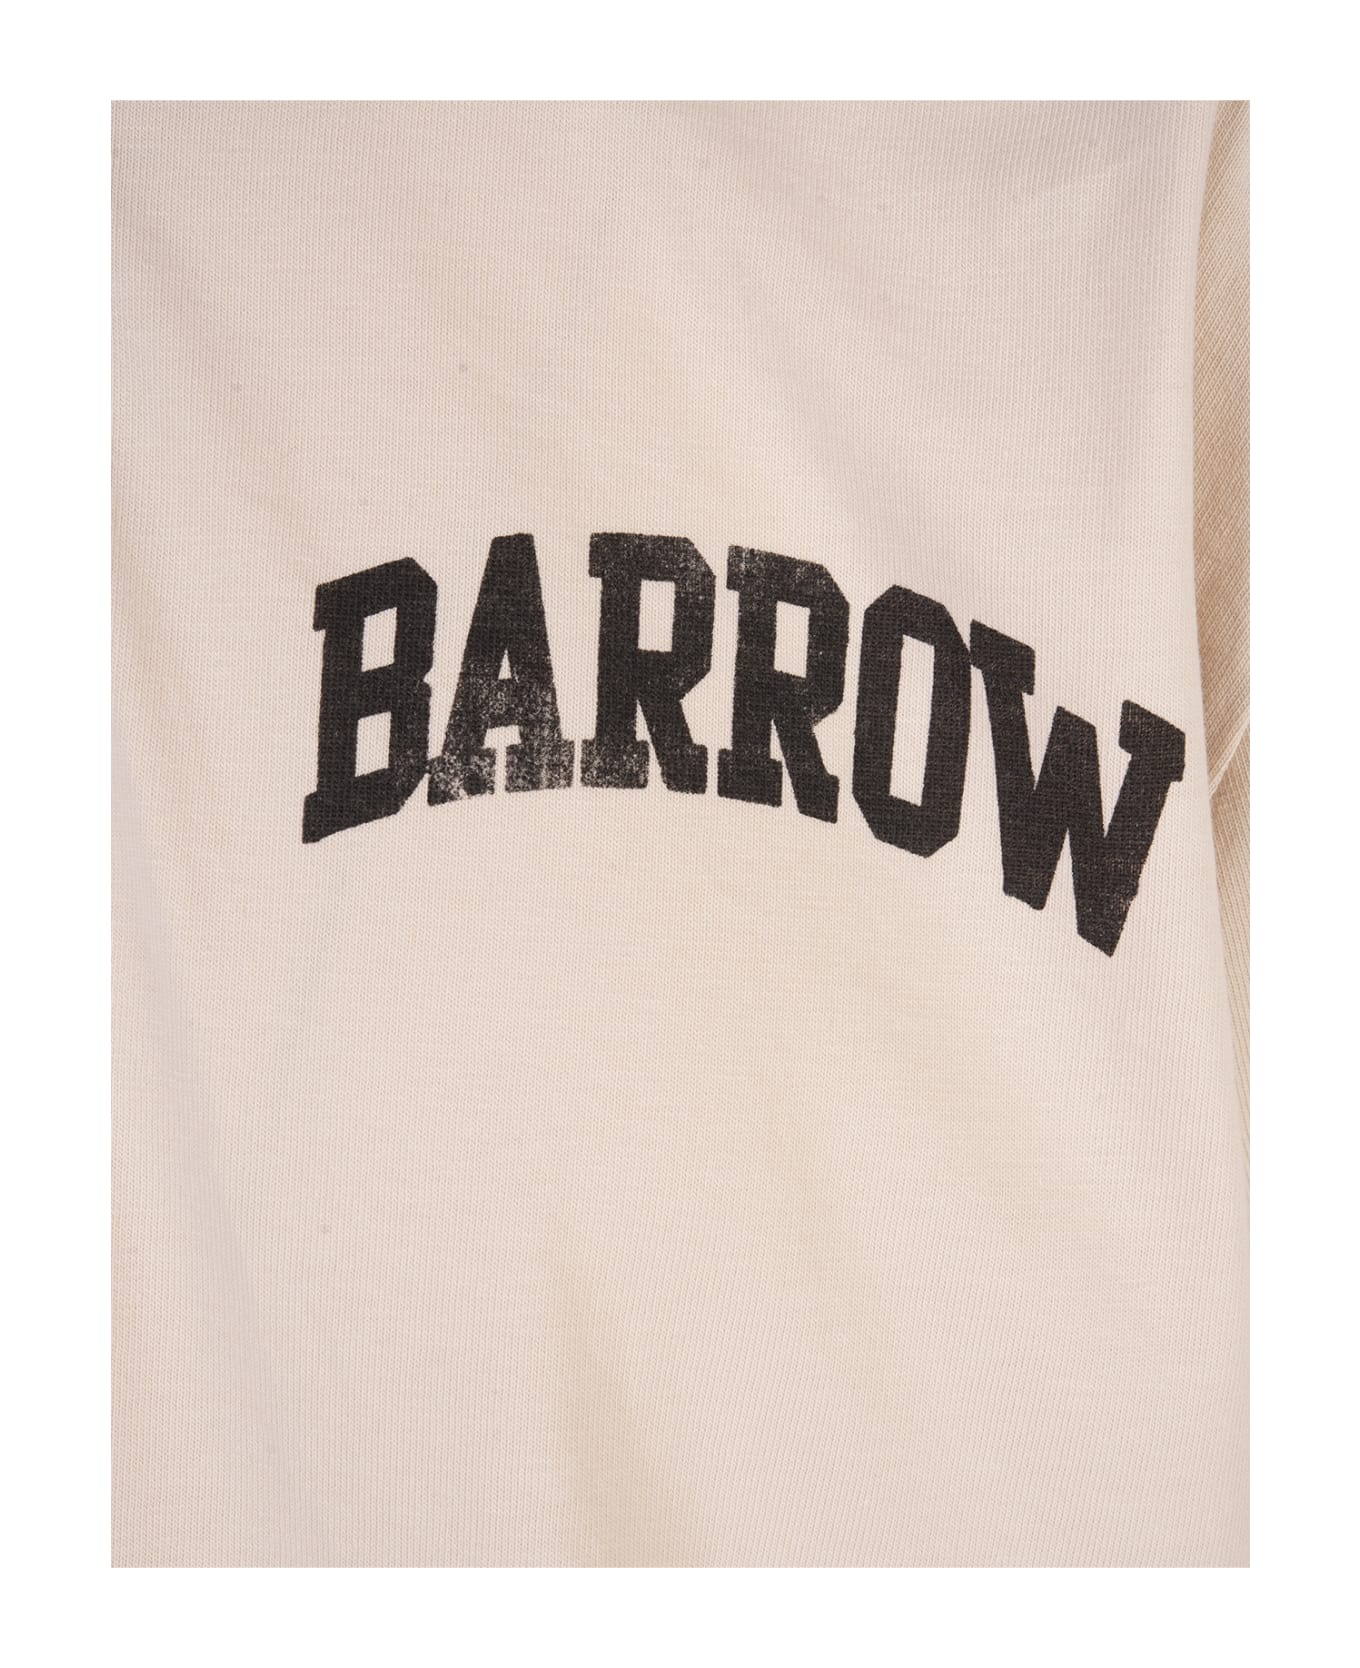 Barrow Dove Polo Shirt With Logo And Smile - Brown ポロシャツ